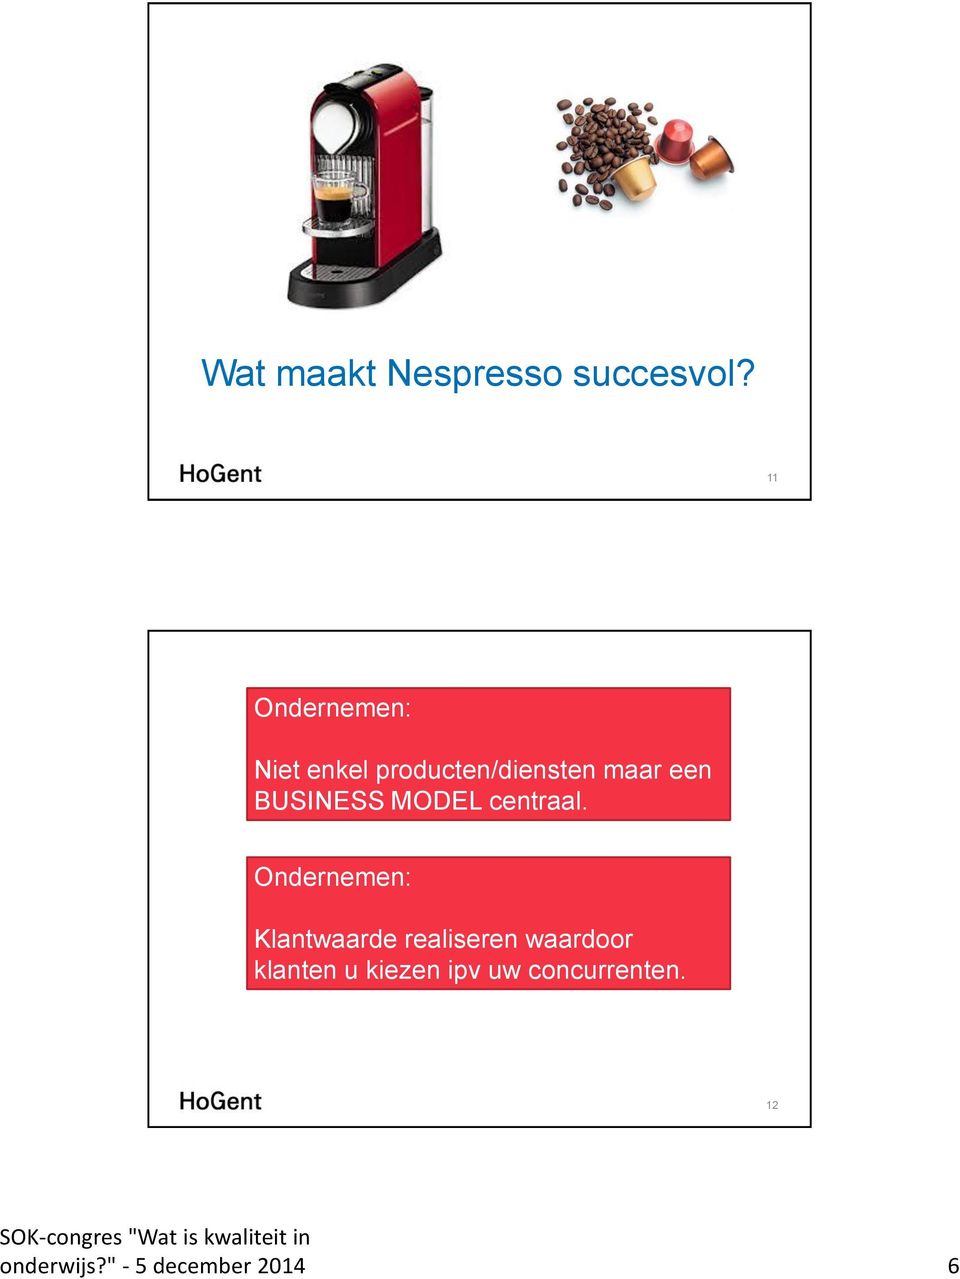 BUSINESS MODEL centraal.